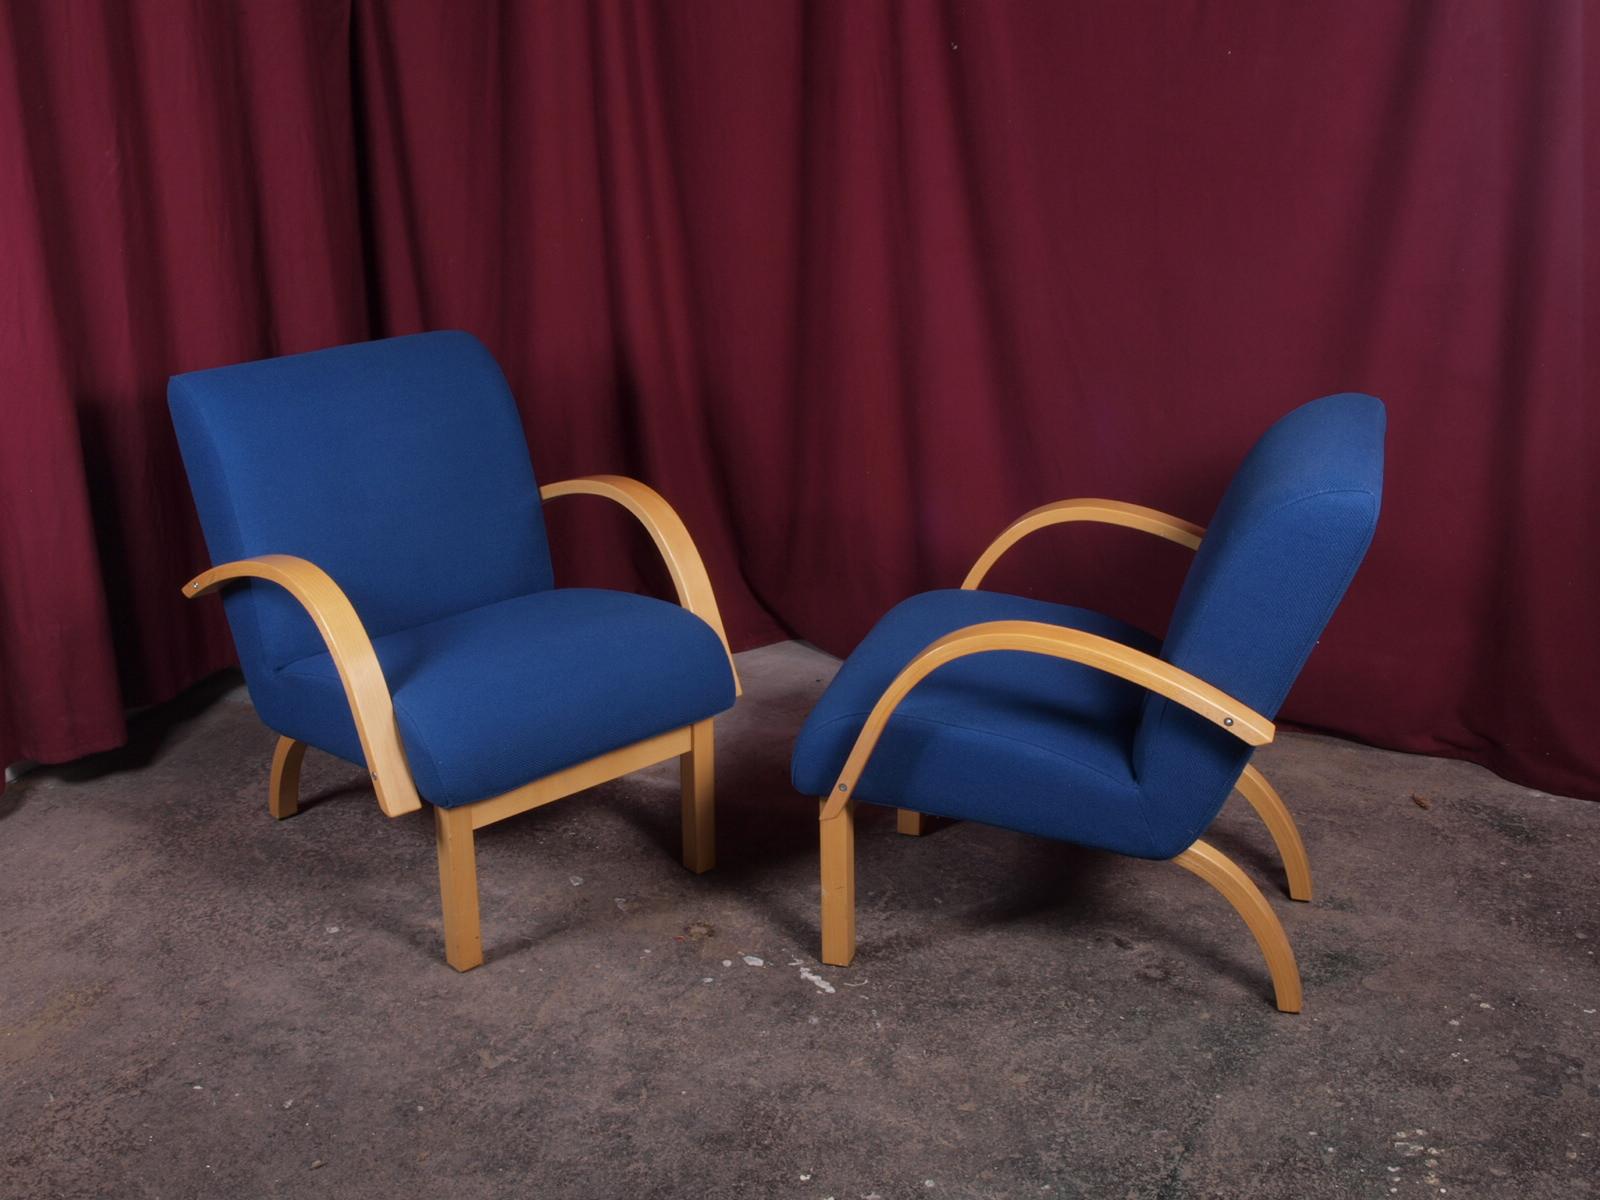 Add a touch of Swedish design to your living space with these two low blue armchairs from Kinnarps, a furniture manufacturer founded in 1942. These chairs were crafted in the 1990s and are both durable and in excellent condition, making them a